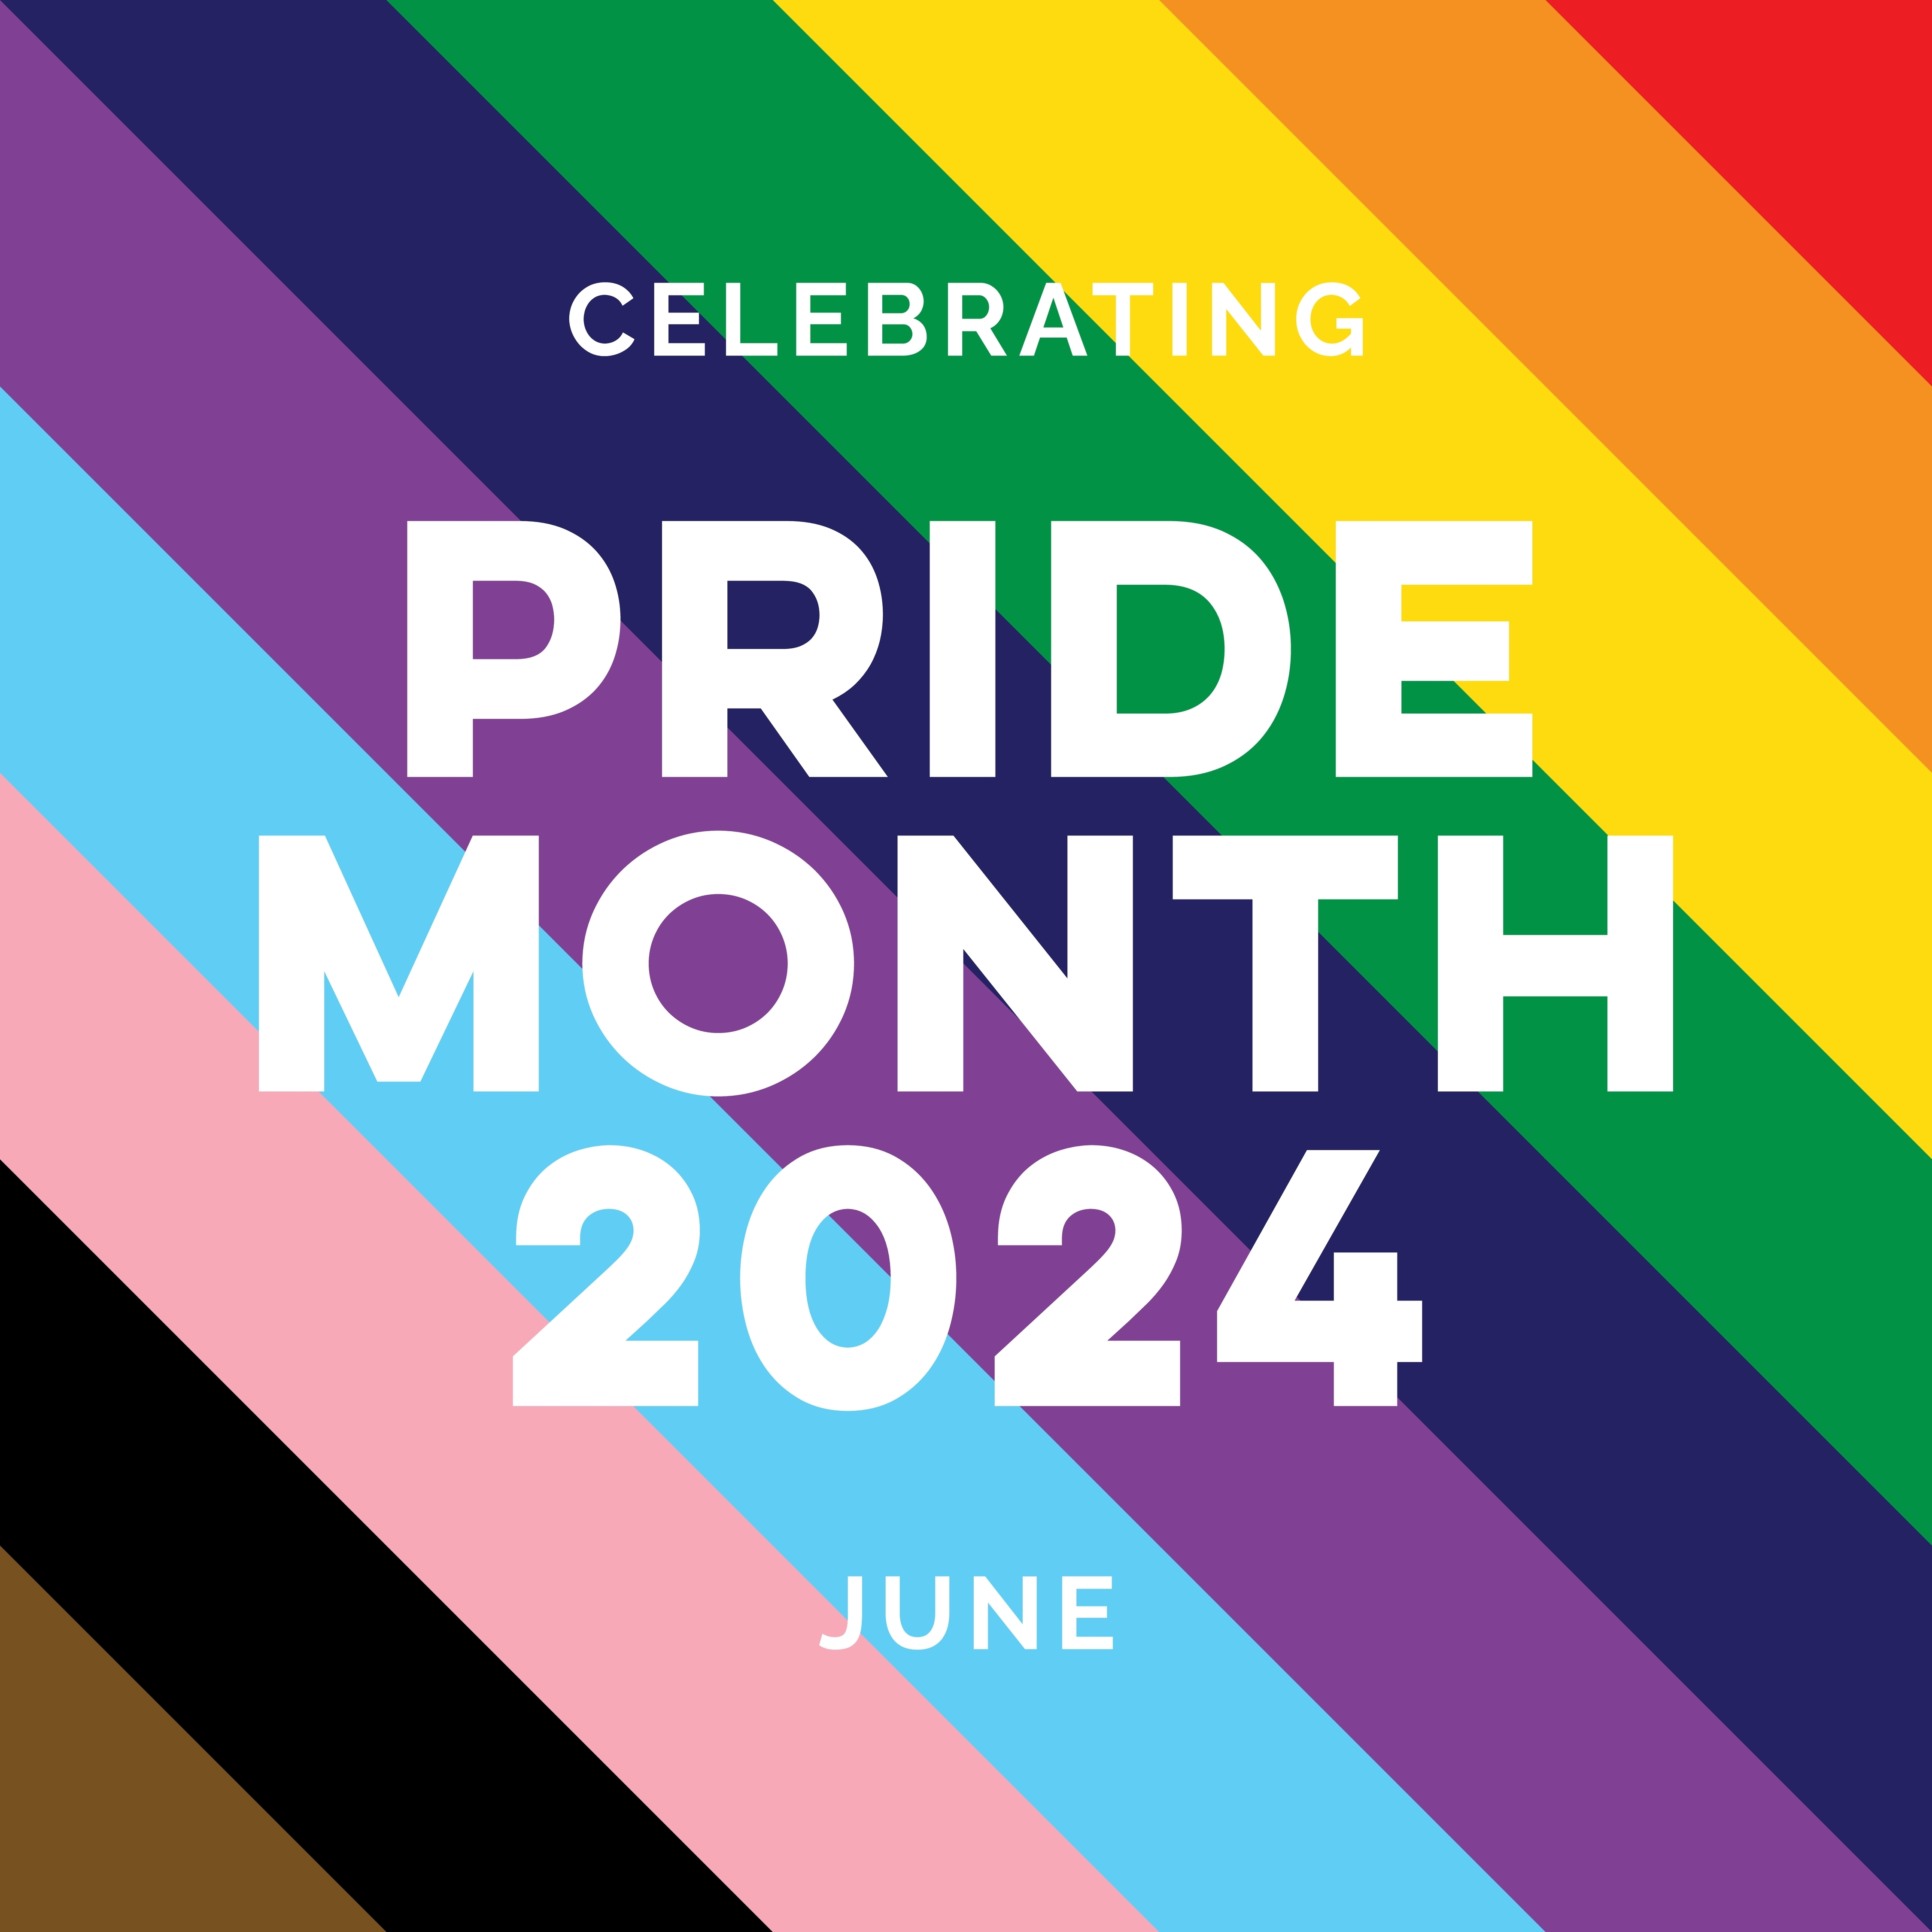 What Does Pride Month Mean to You?